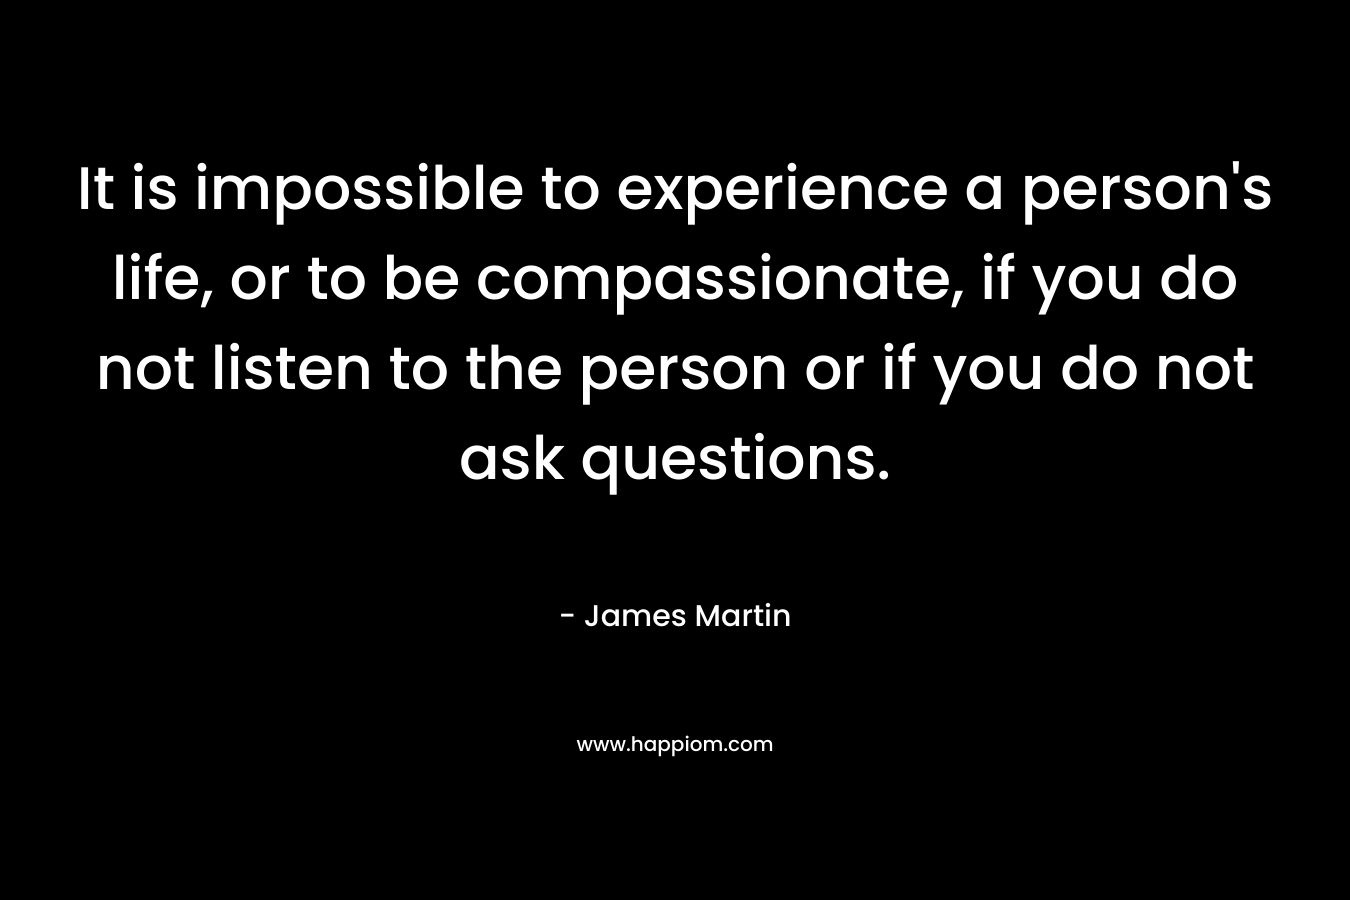 It is impossible to experience a person’s life, or to be compassionate, if you do not listen to the person or if you do not ask questions. – James Martin